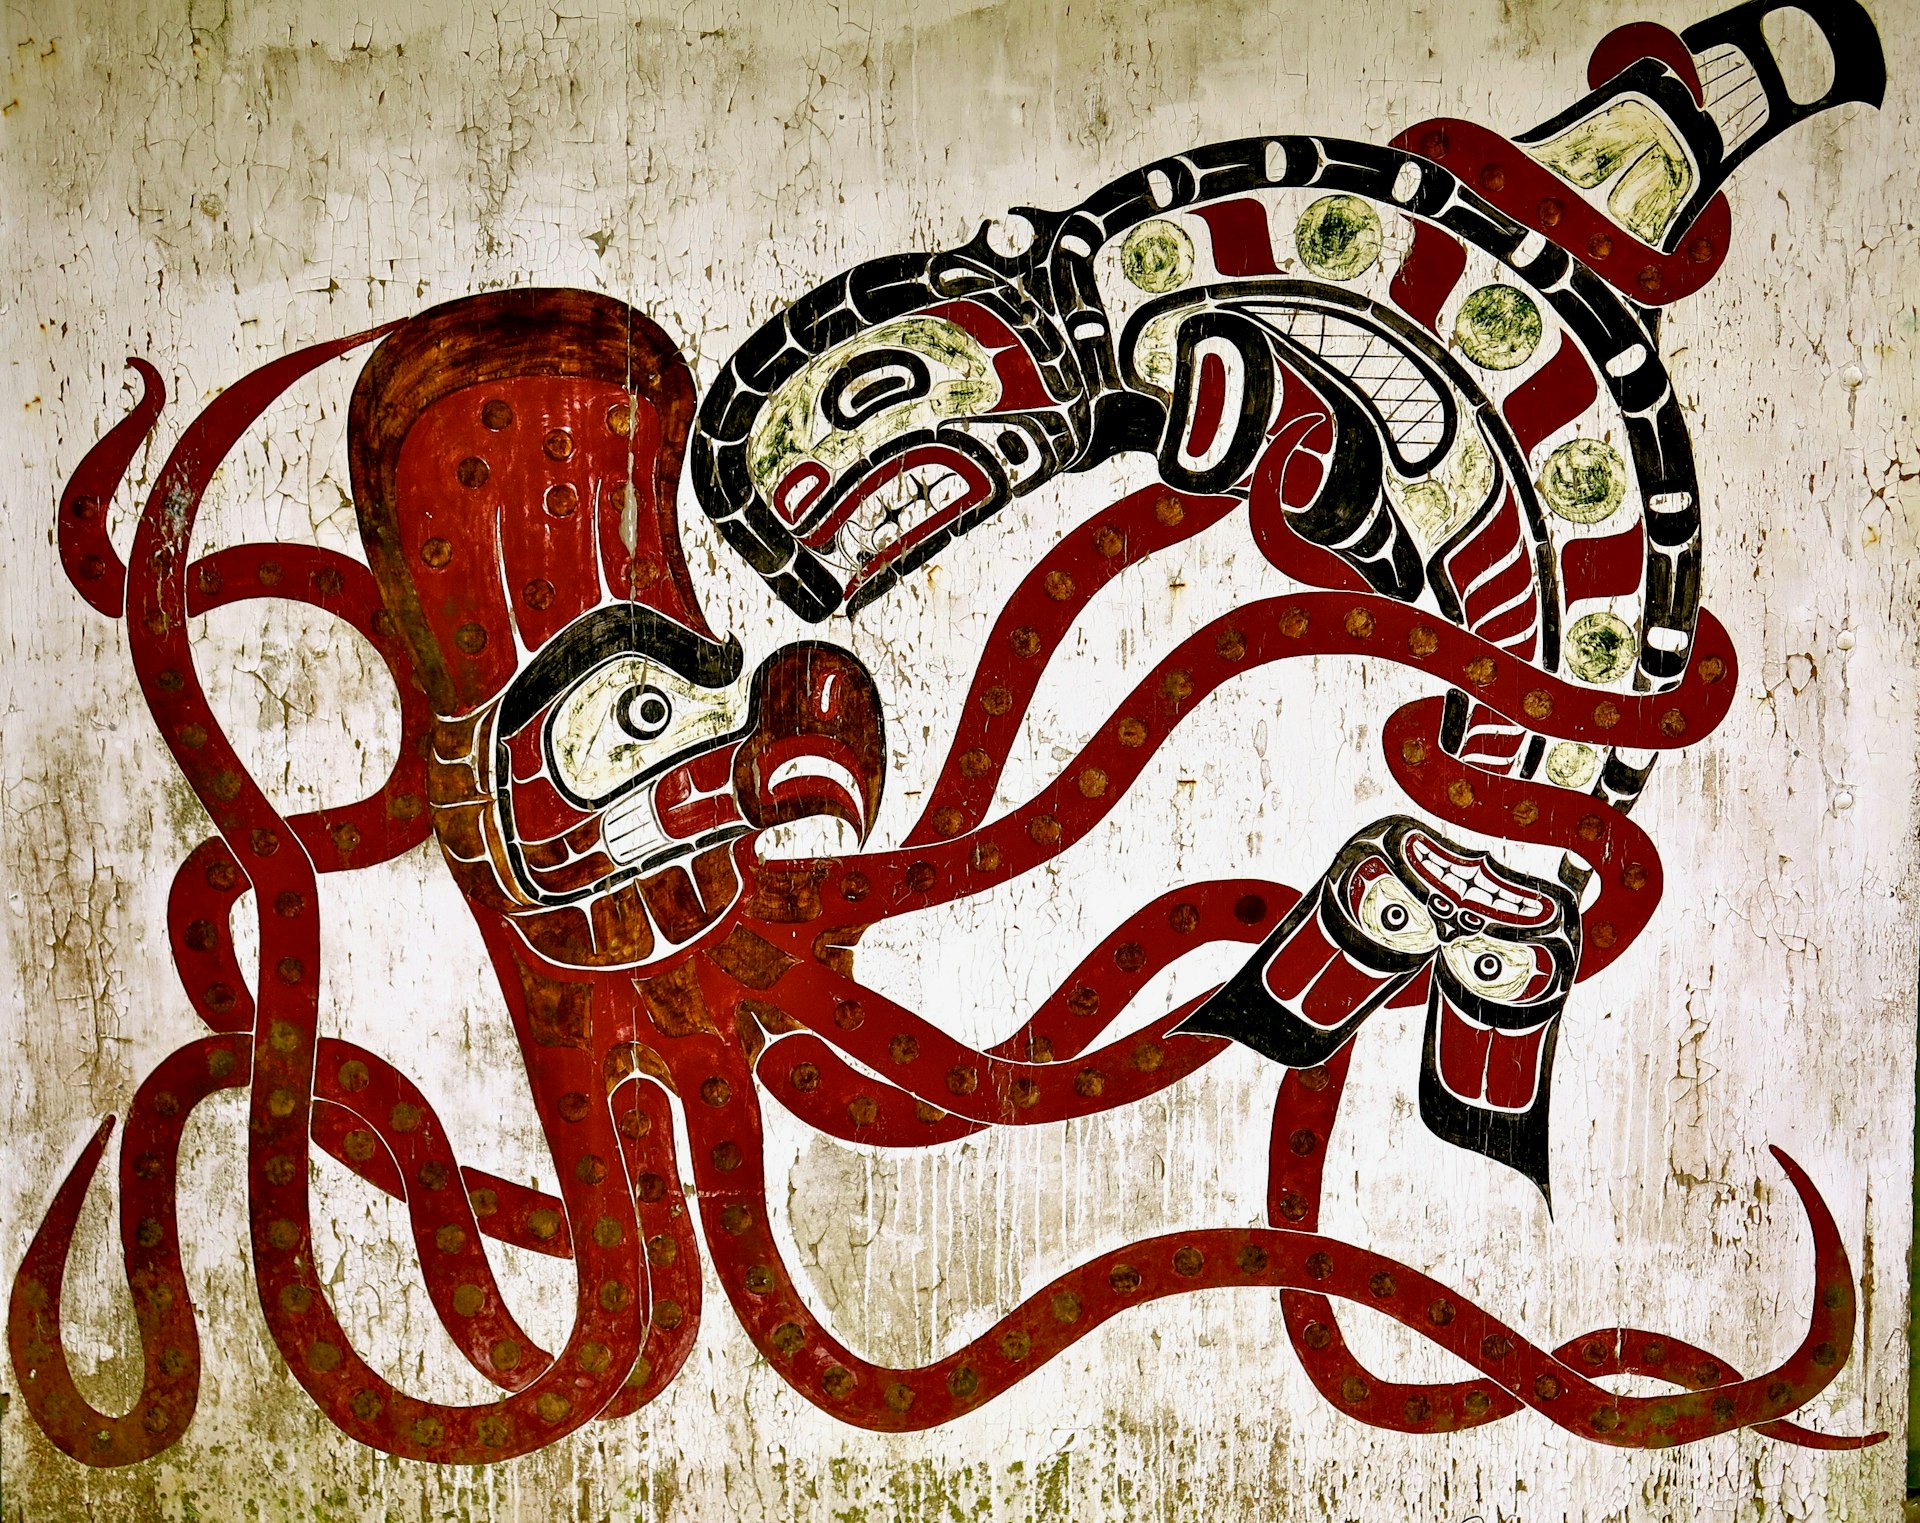 A mural on a wall in Alert Bay depicting an octopus and orca in battle